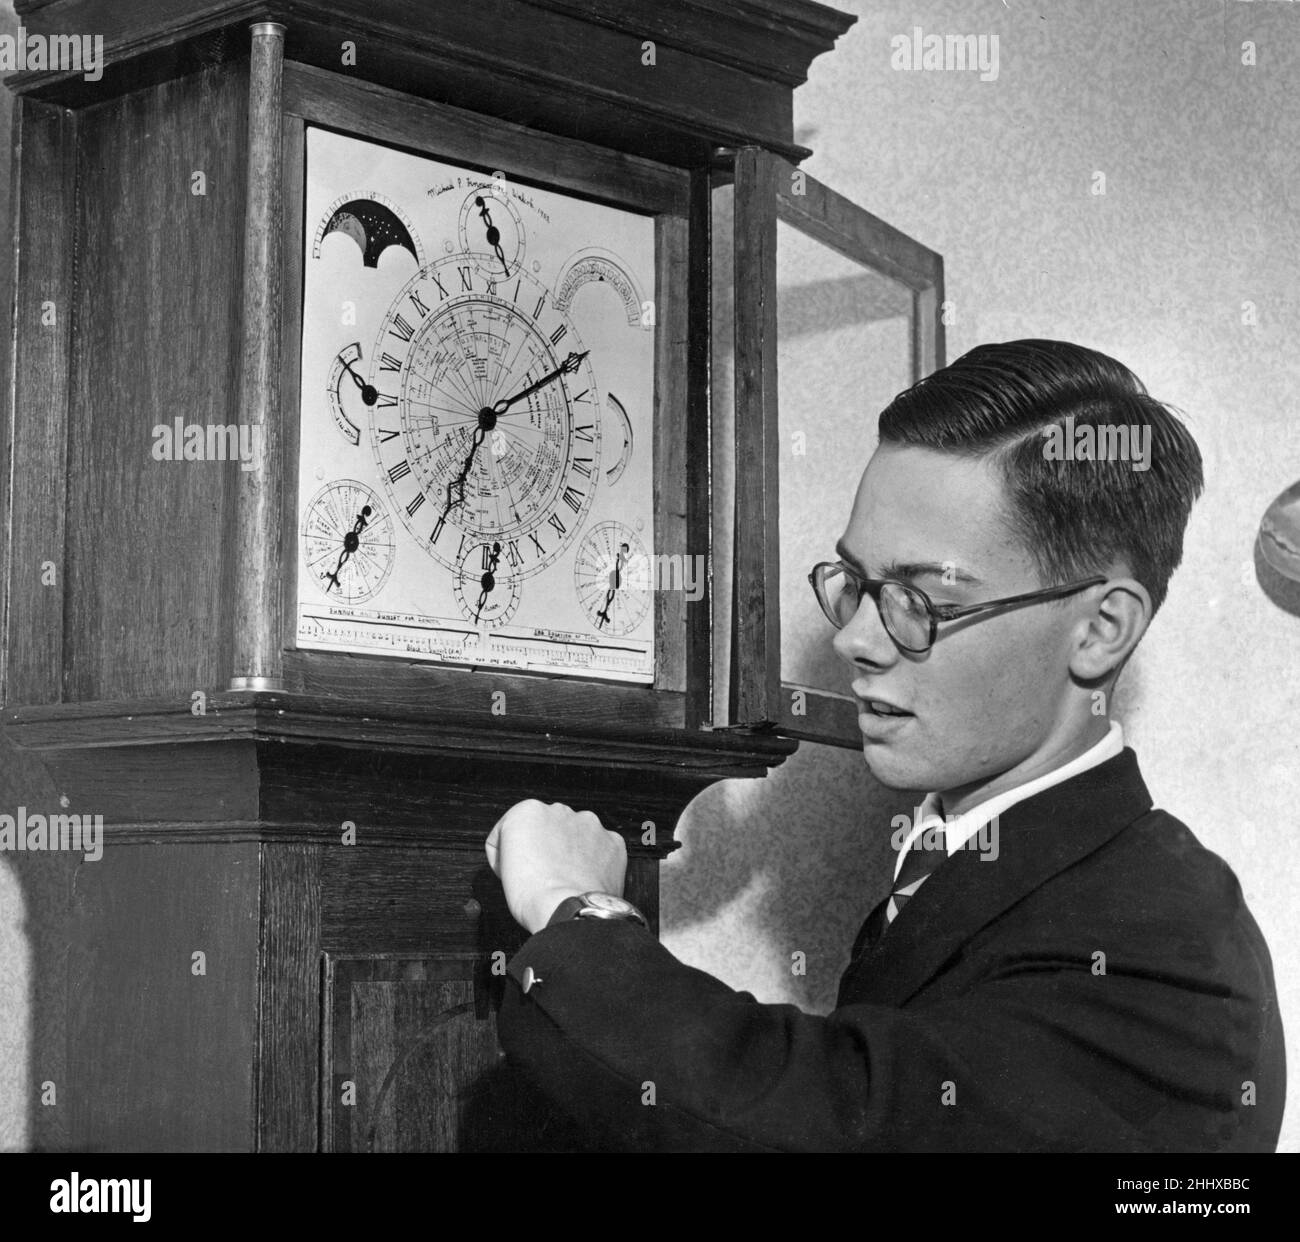 Father time gives Black and White Stock Photos & Images - Alamy